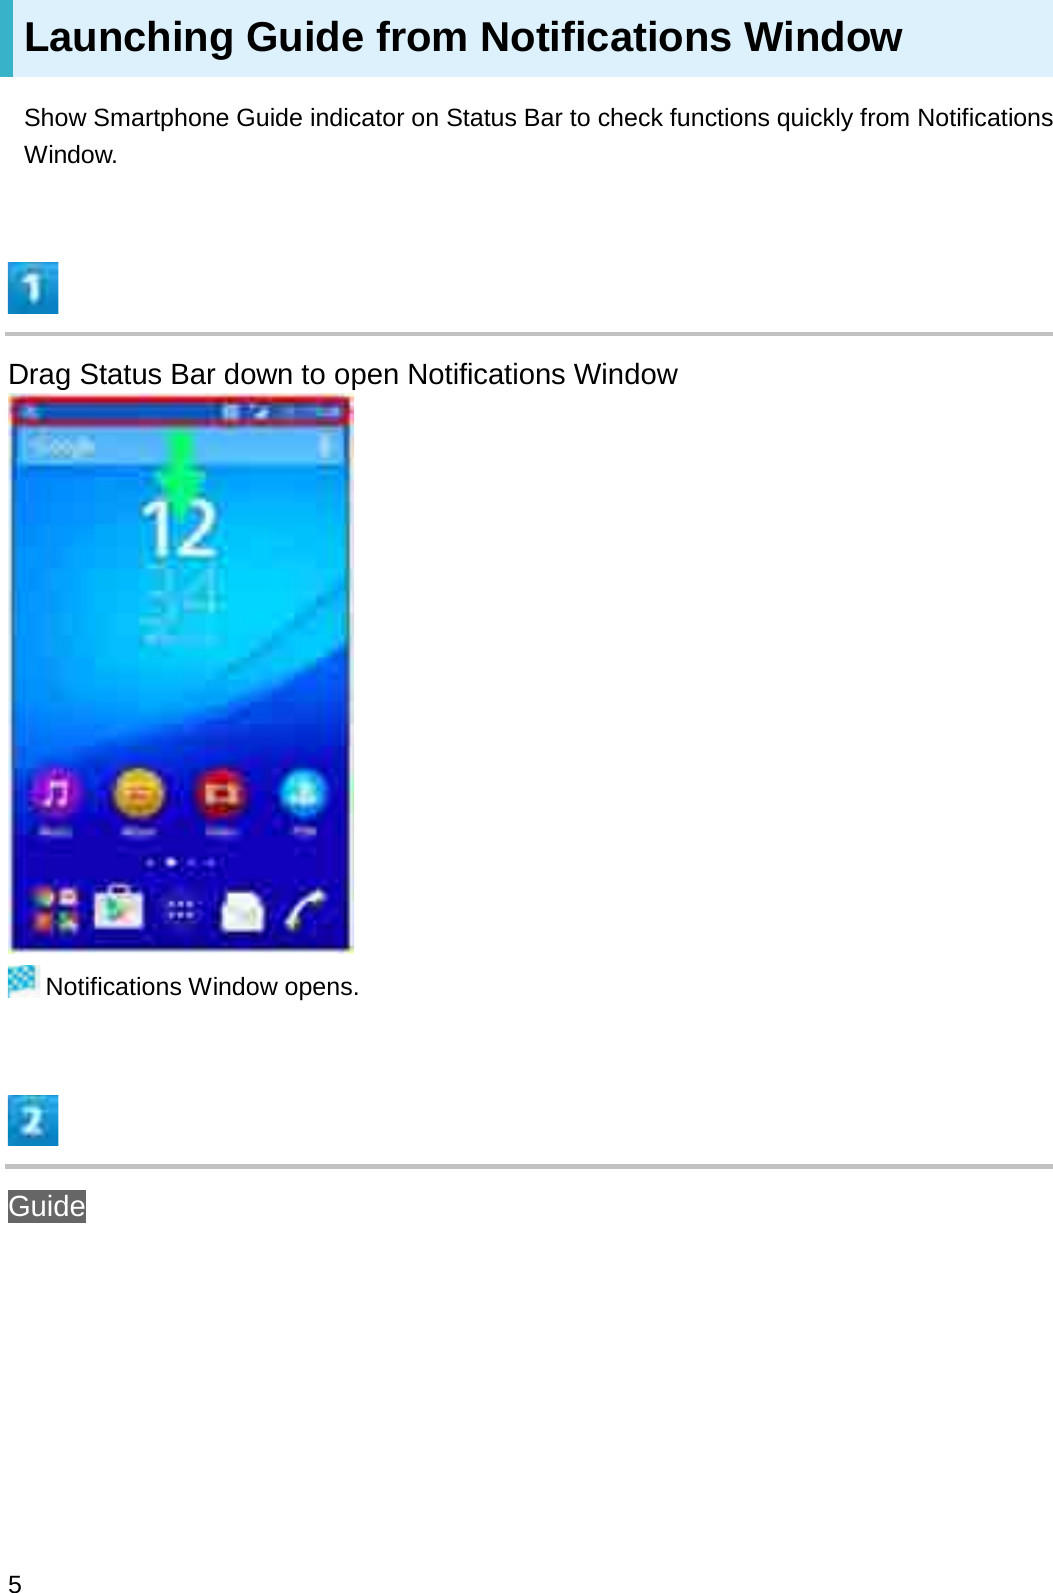 Launching Guide from Notifications WindowShow Smartphone Guide indicator on Status Bar to check functions quickly from Notifications Window.Drag Status Bar down to open Notifications WindowNotifications Window opens.Guide5